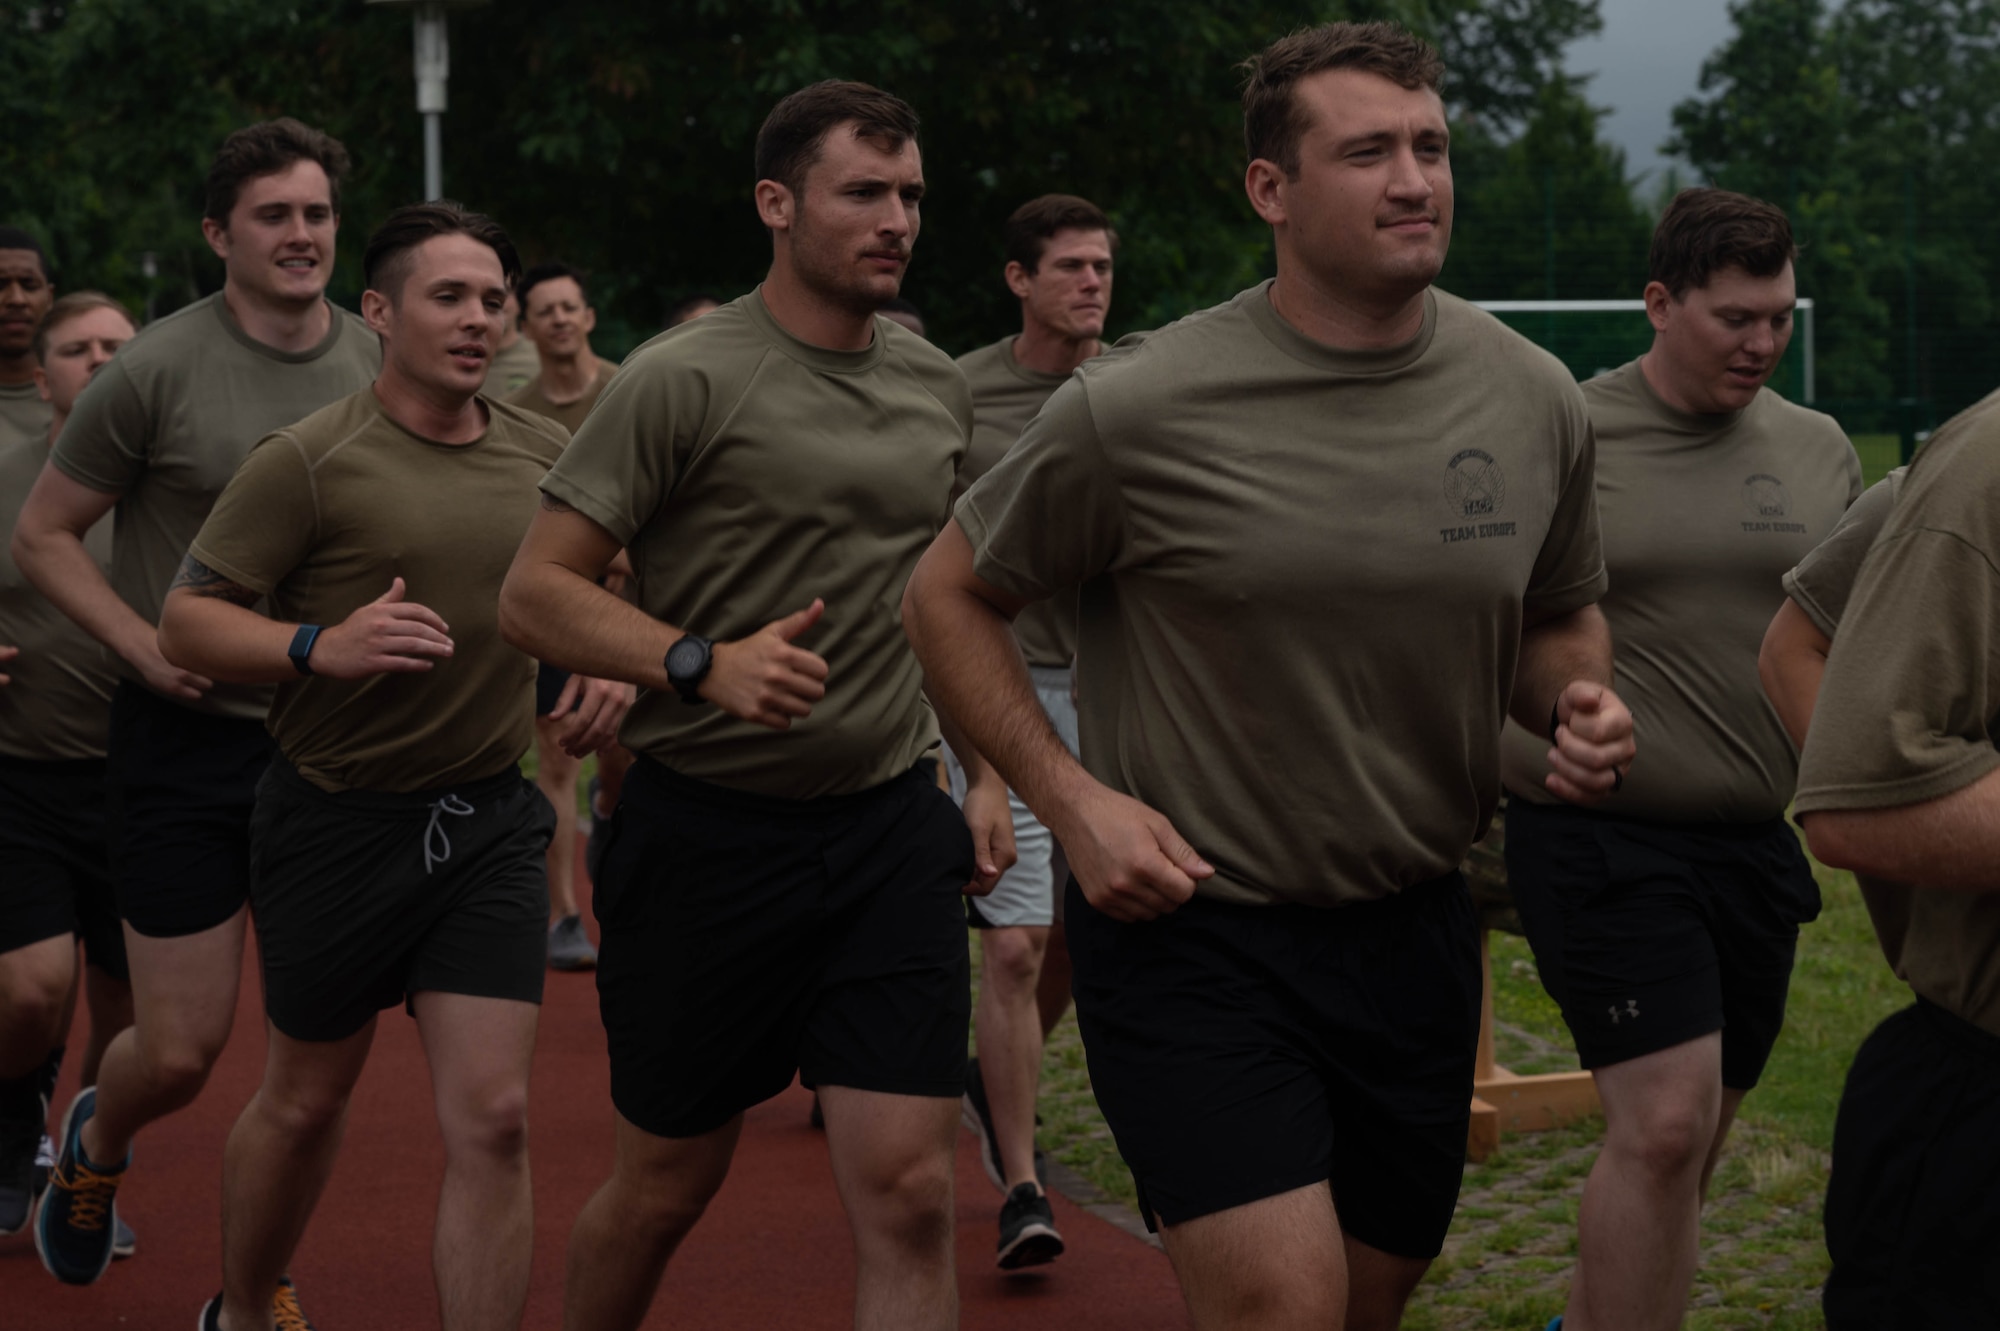 Members of the 2nd Air Support Operations Squadron run.